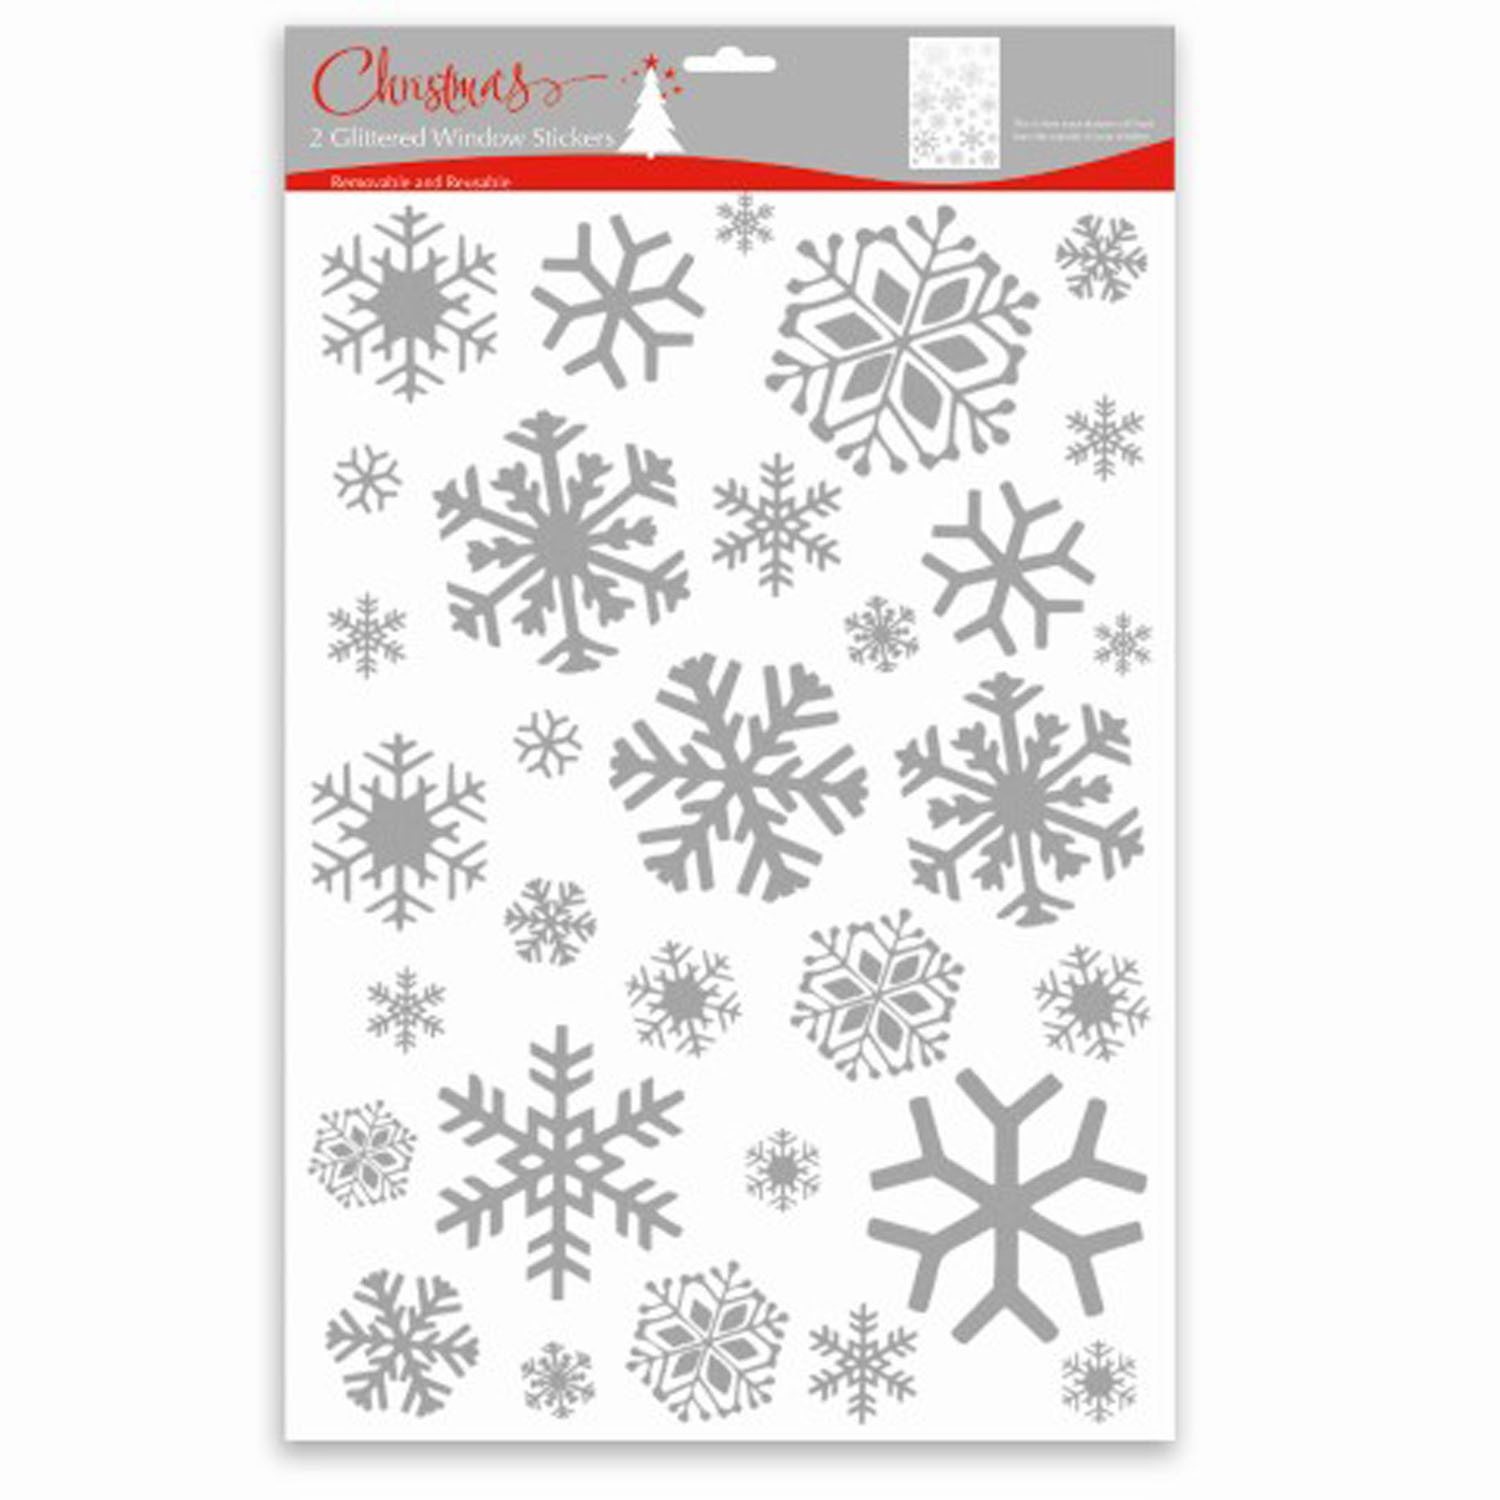 Frosted Fairytale Snowflake Christmas Window Stickers Image